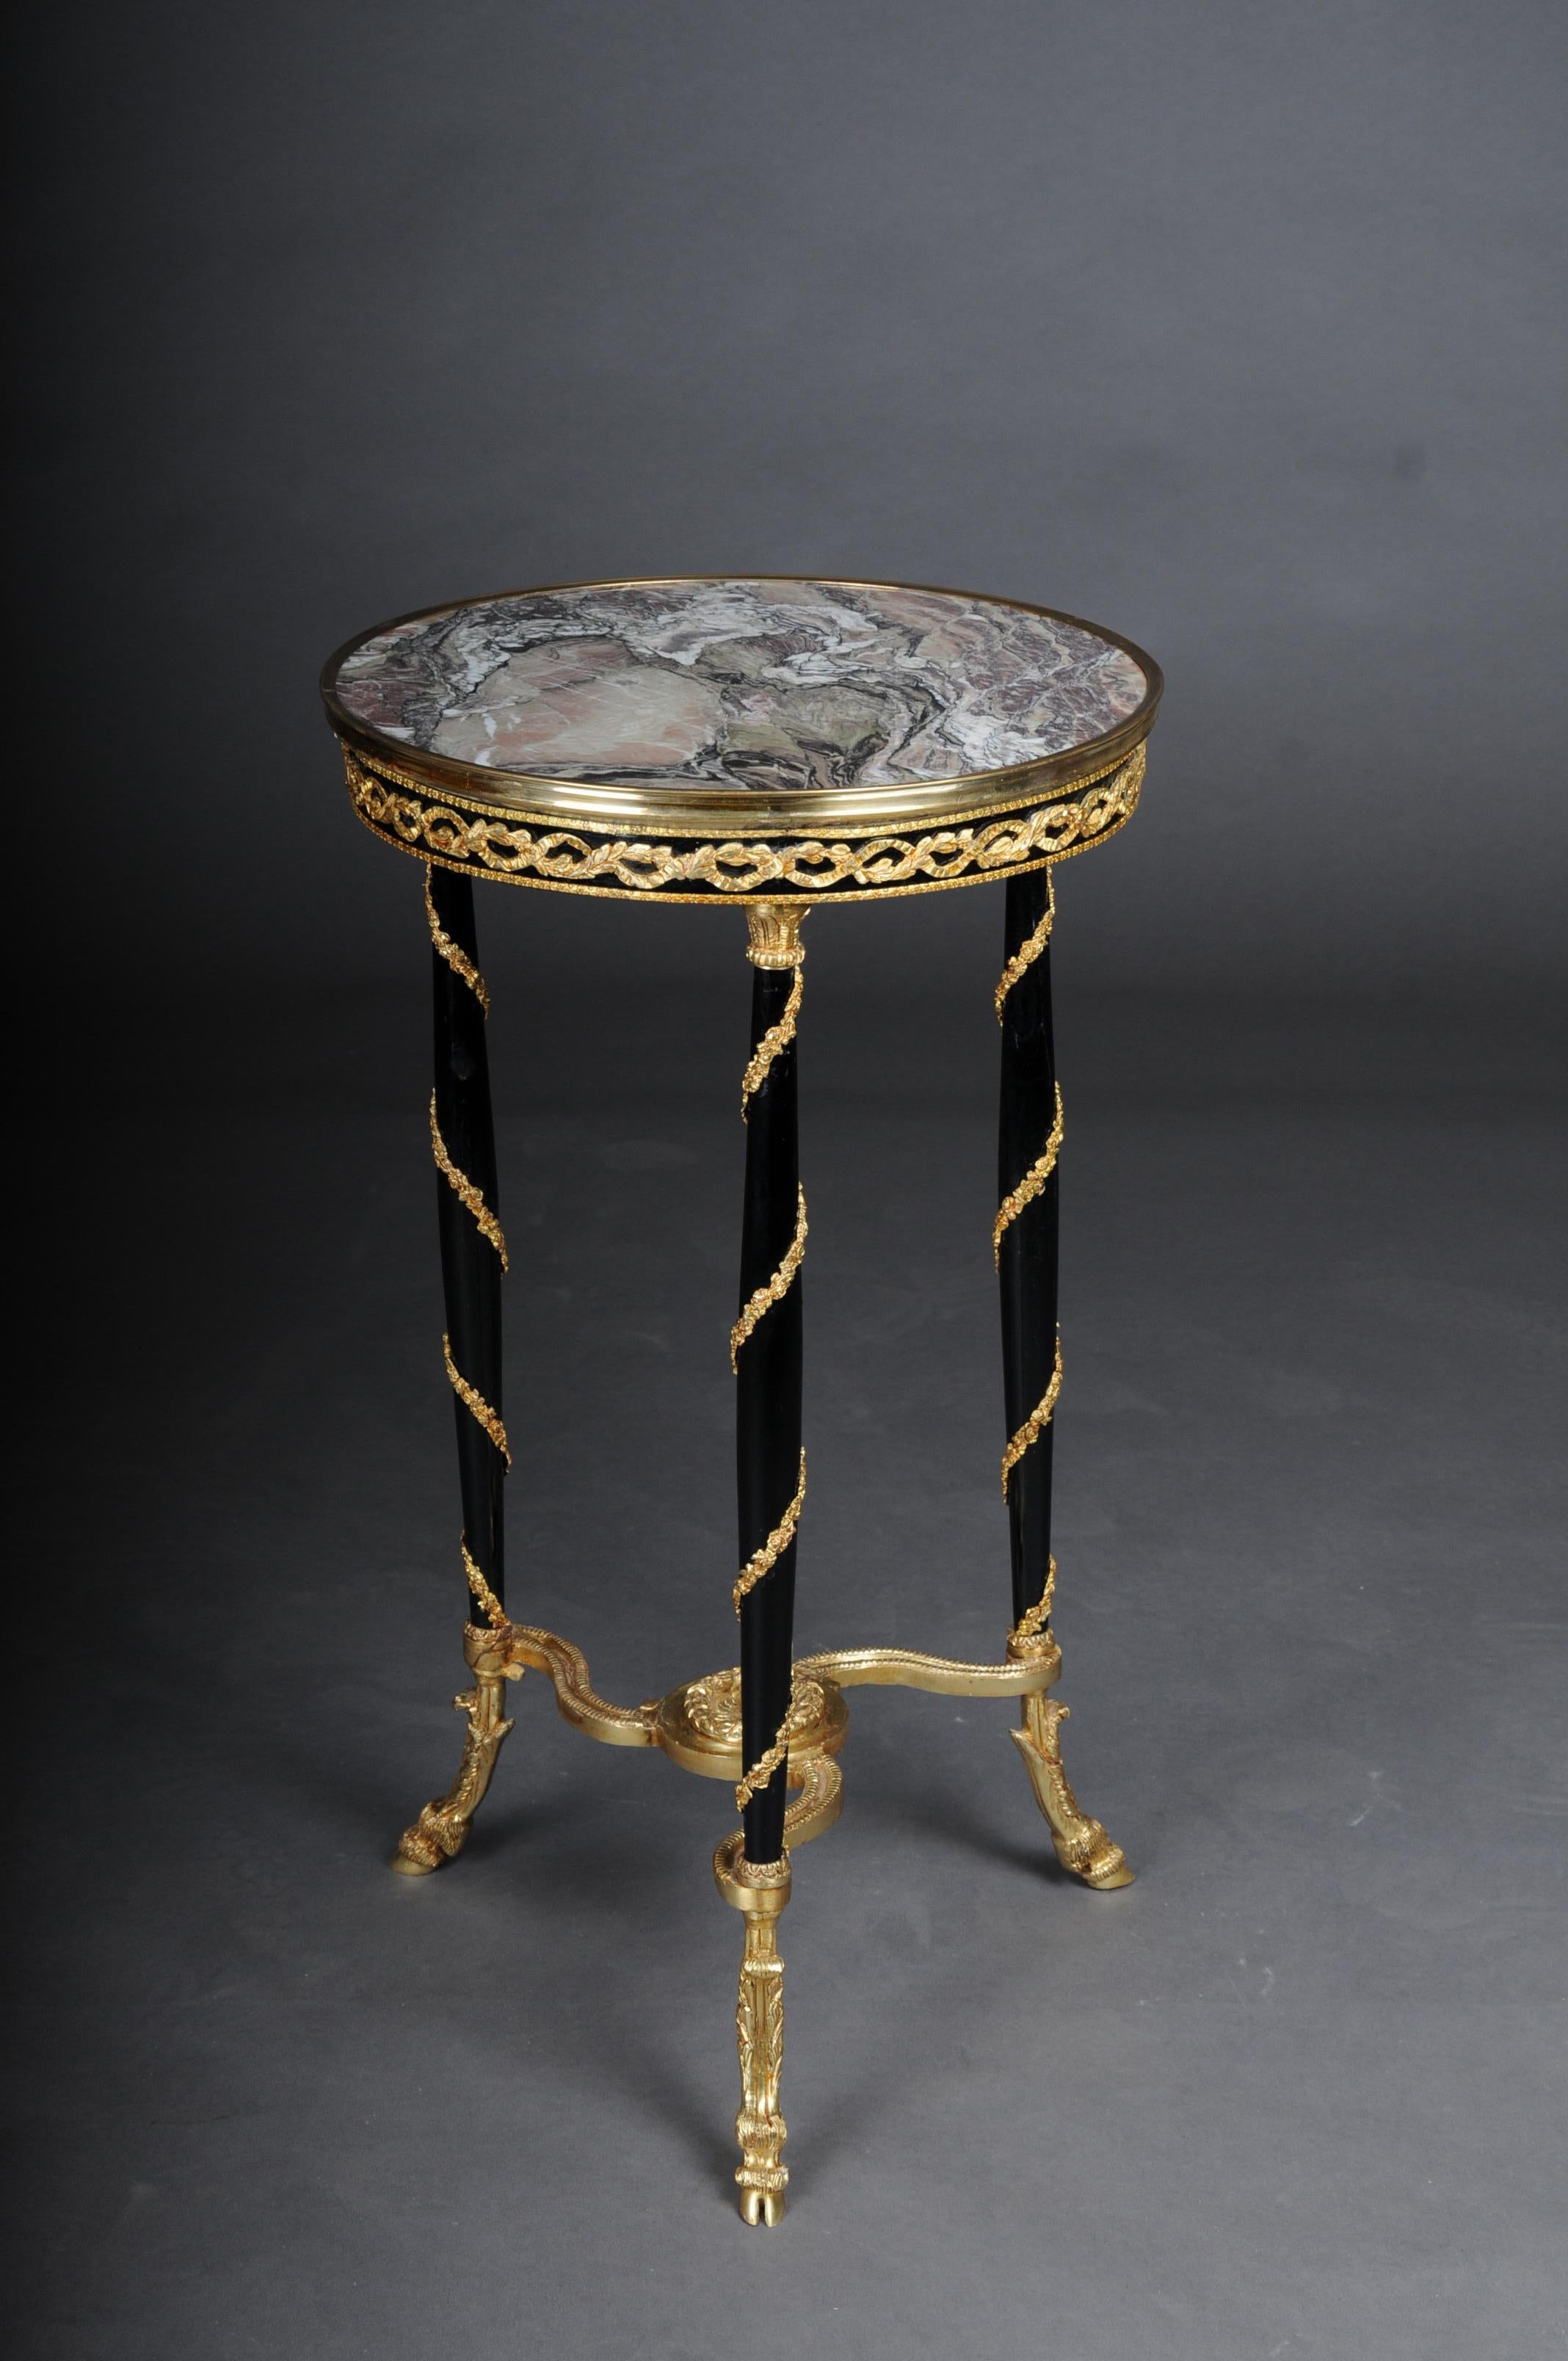 20th century Majestic Empire side table/gueridon beechwood, marble, round, black

Model after Adam Weisweiler 1780

Solid beech wood painted black with gilded brass bronze. Top plate with brass-framed marble top.
Elegant full column legs